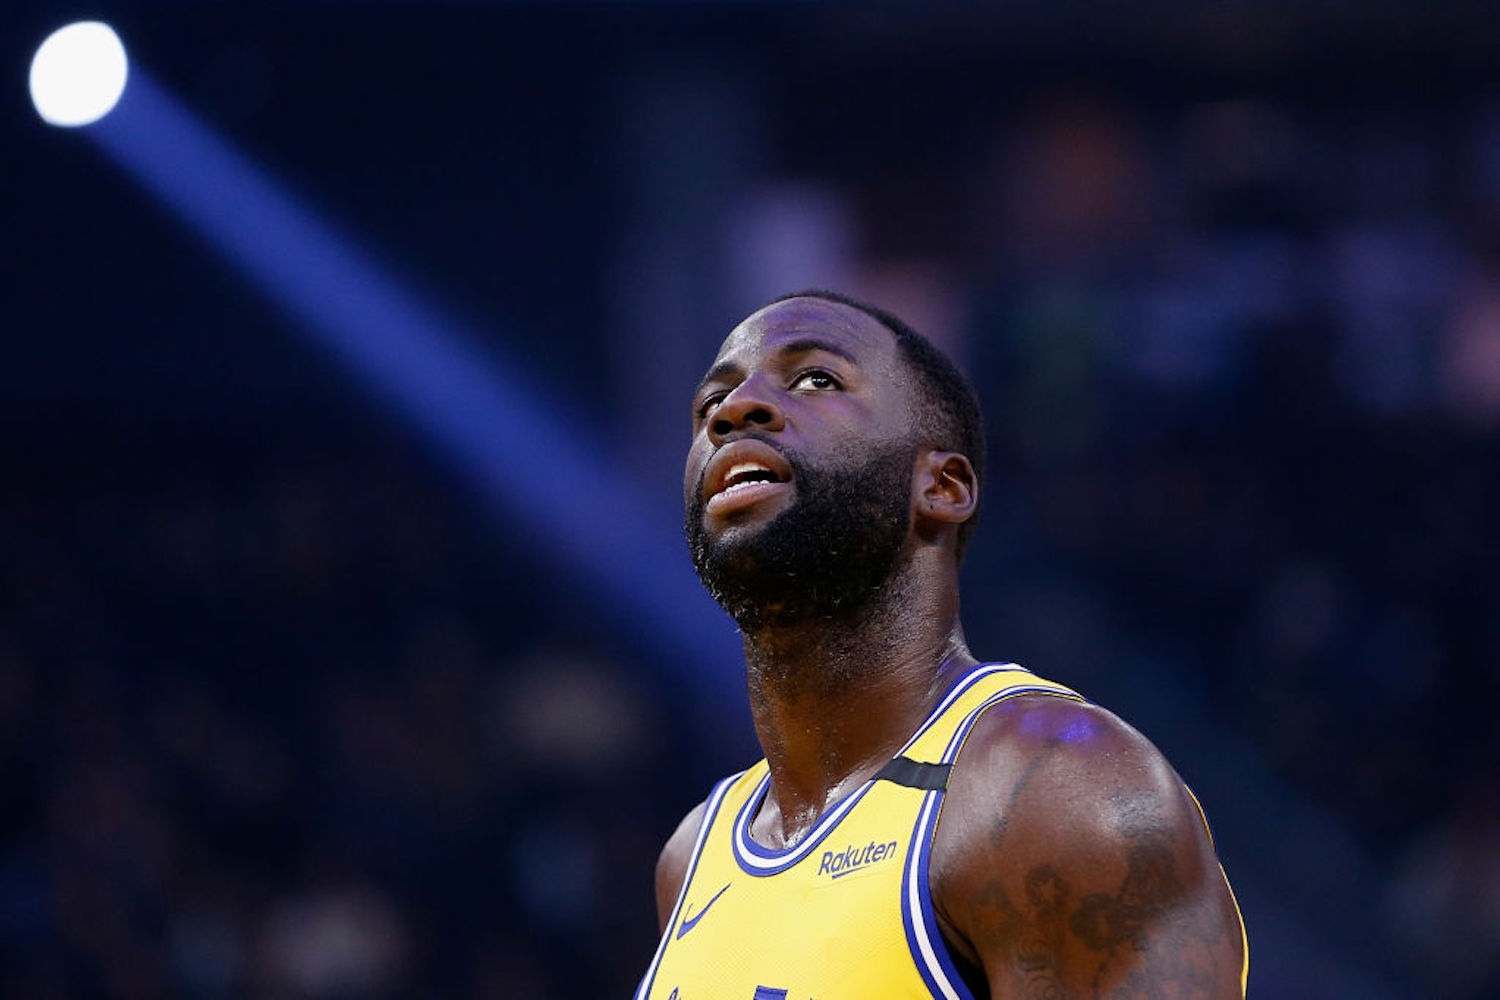 Draymond Green is always one to speak his mind, and he had a passionate message for the protesters in Washington D.C. on Wednesday.